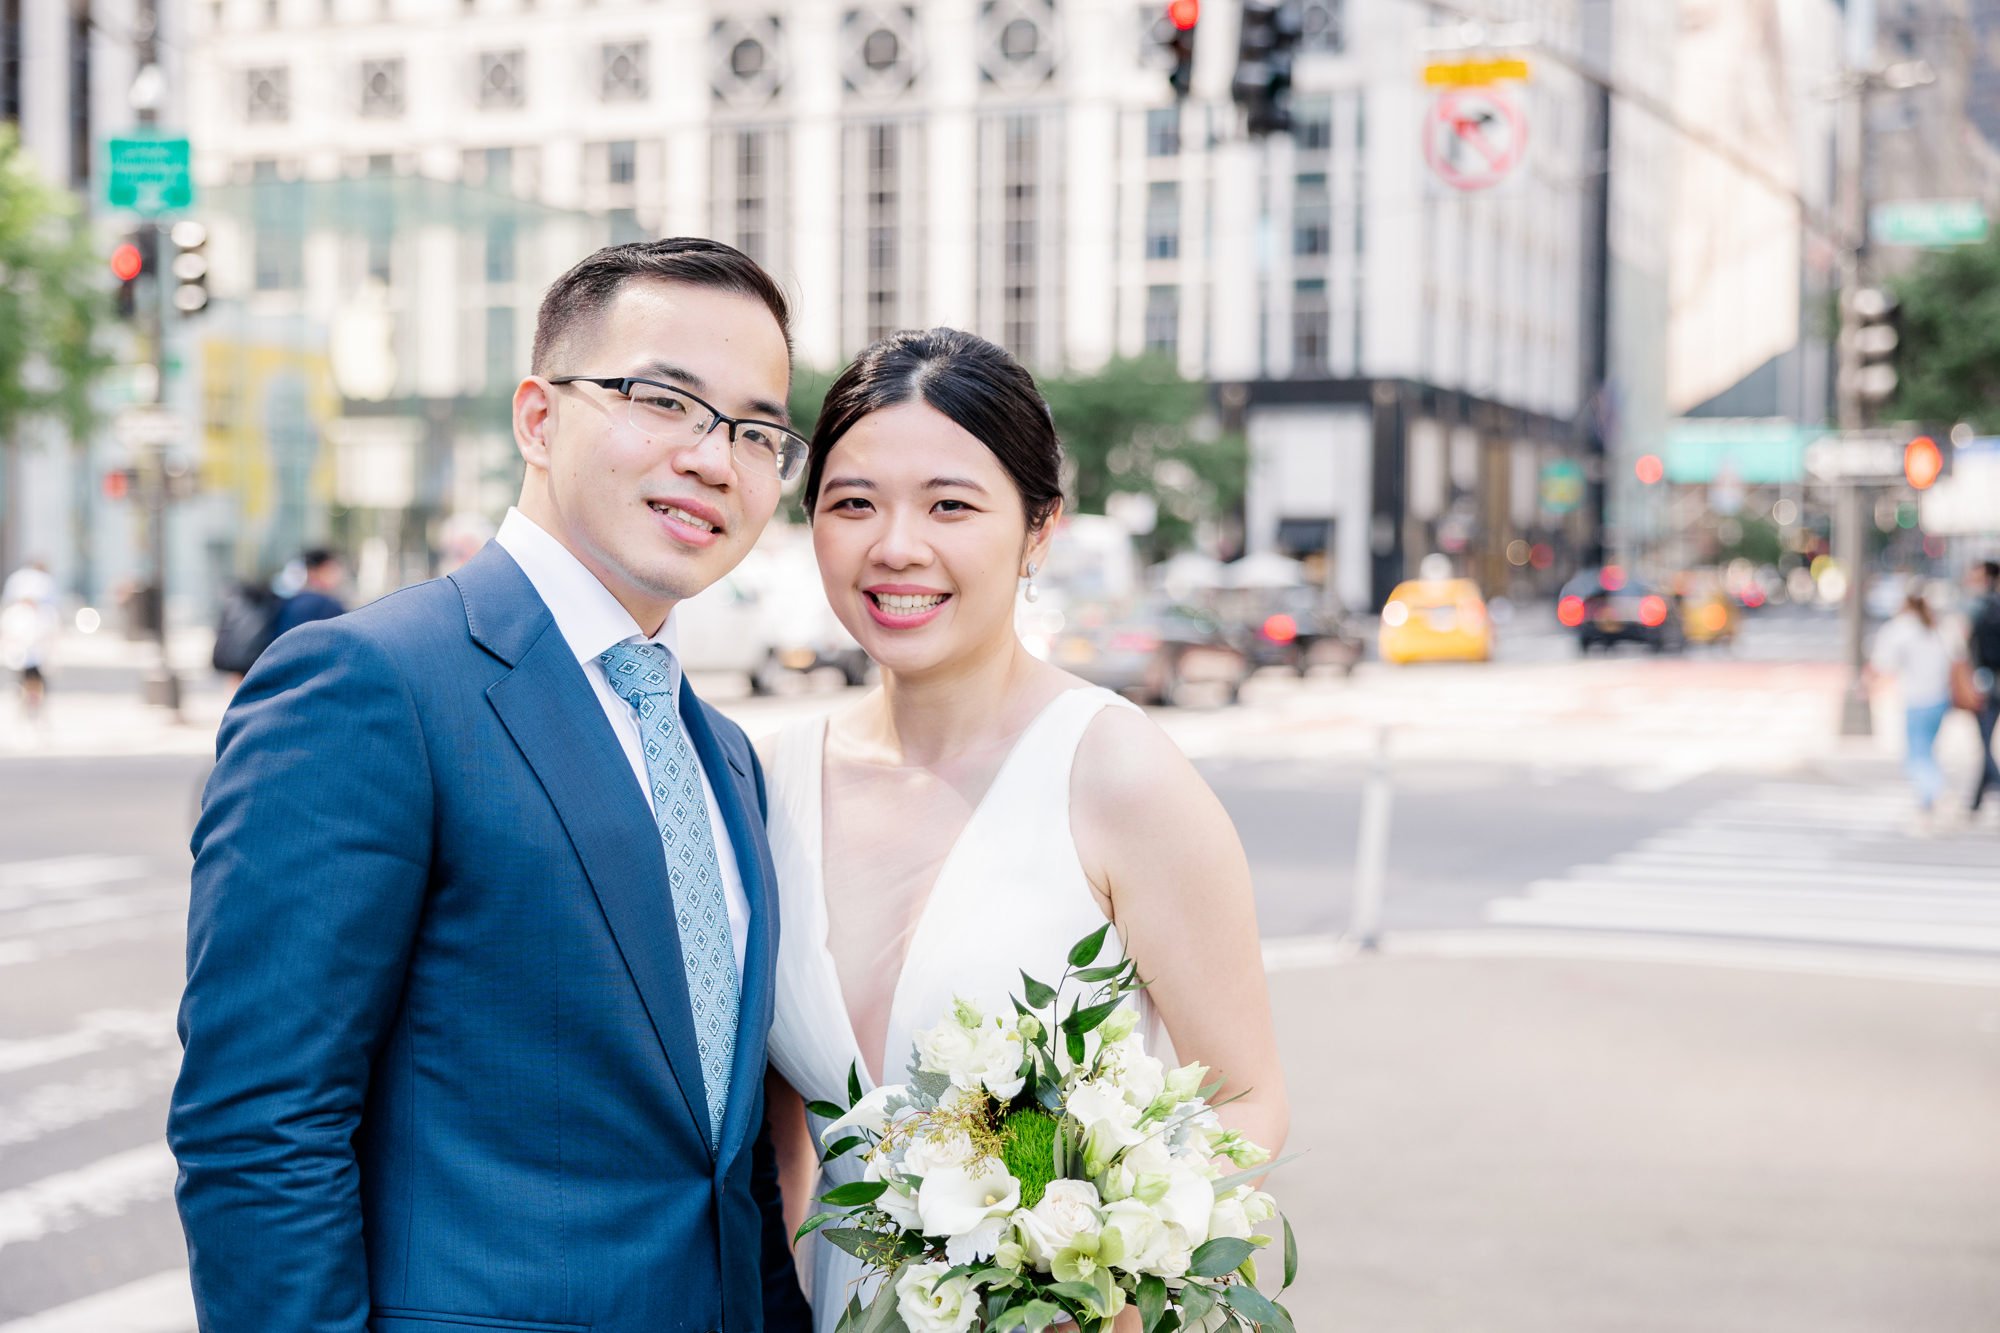 Lovely Elopement Photos in DUMBO and Central Park New York